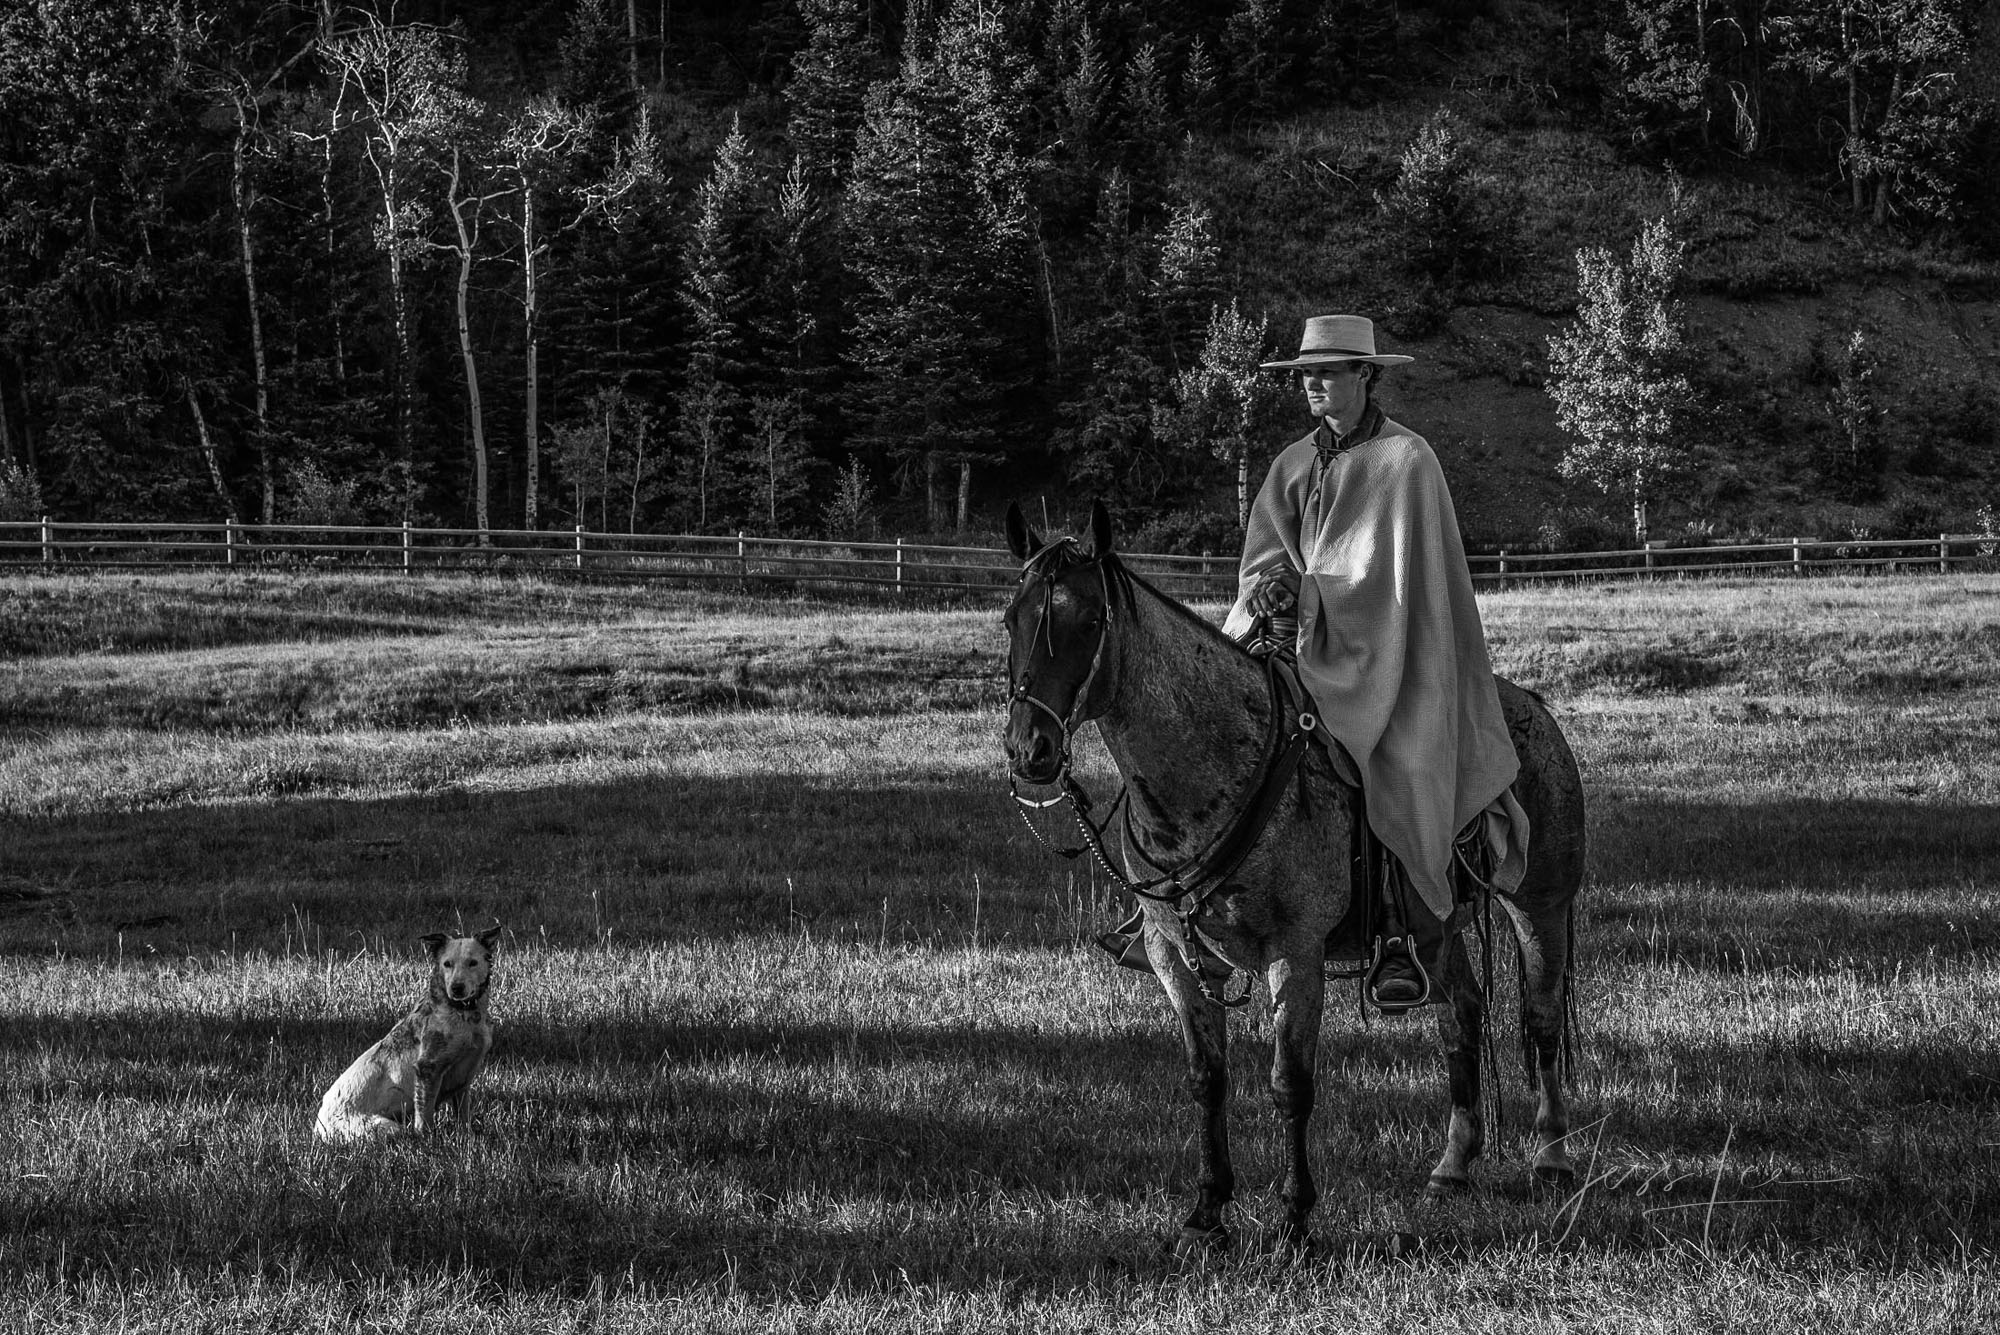 Fine Art Limited Edition Photo Prints of Cowboys, Horses, and life in the West. Waiting - Cowboy pictures in black and white....